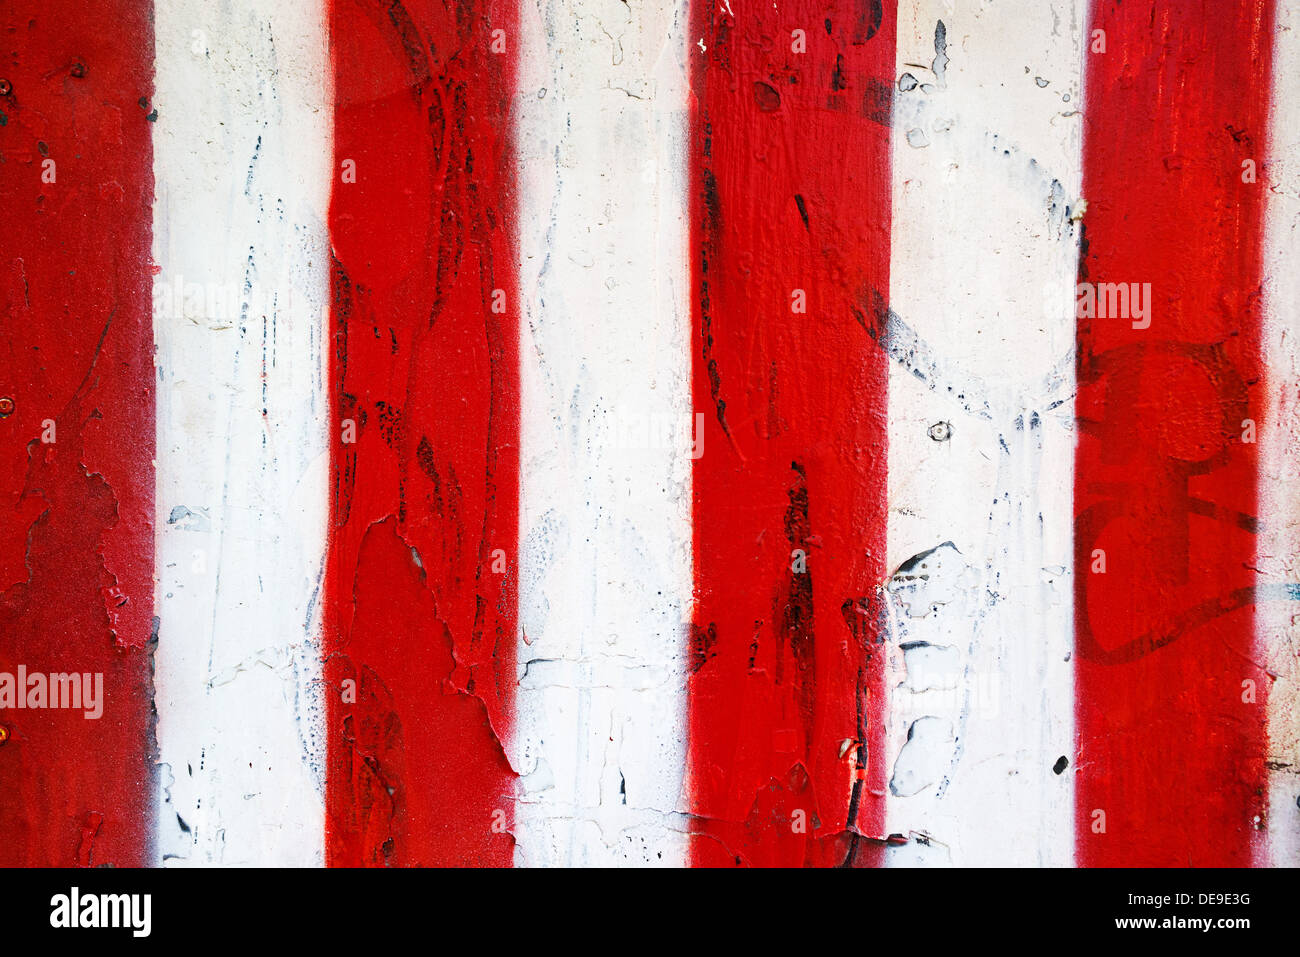 Red and white stripped grunge texture as background Stock Photo